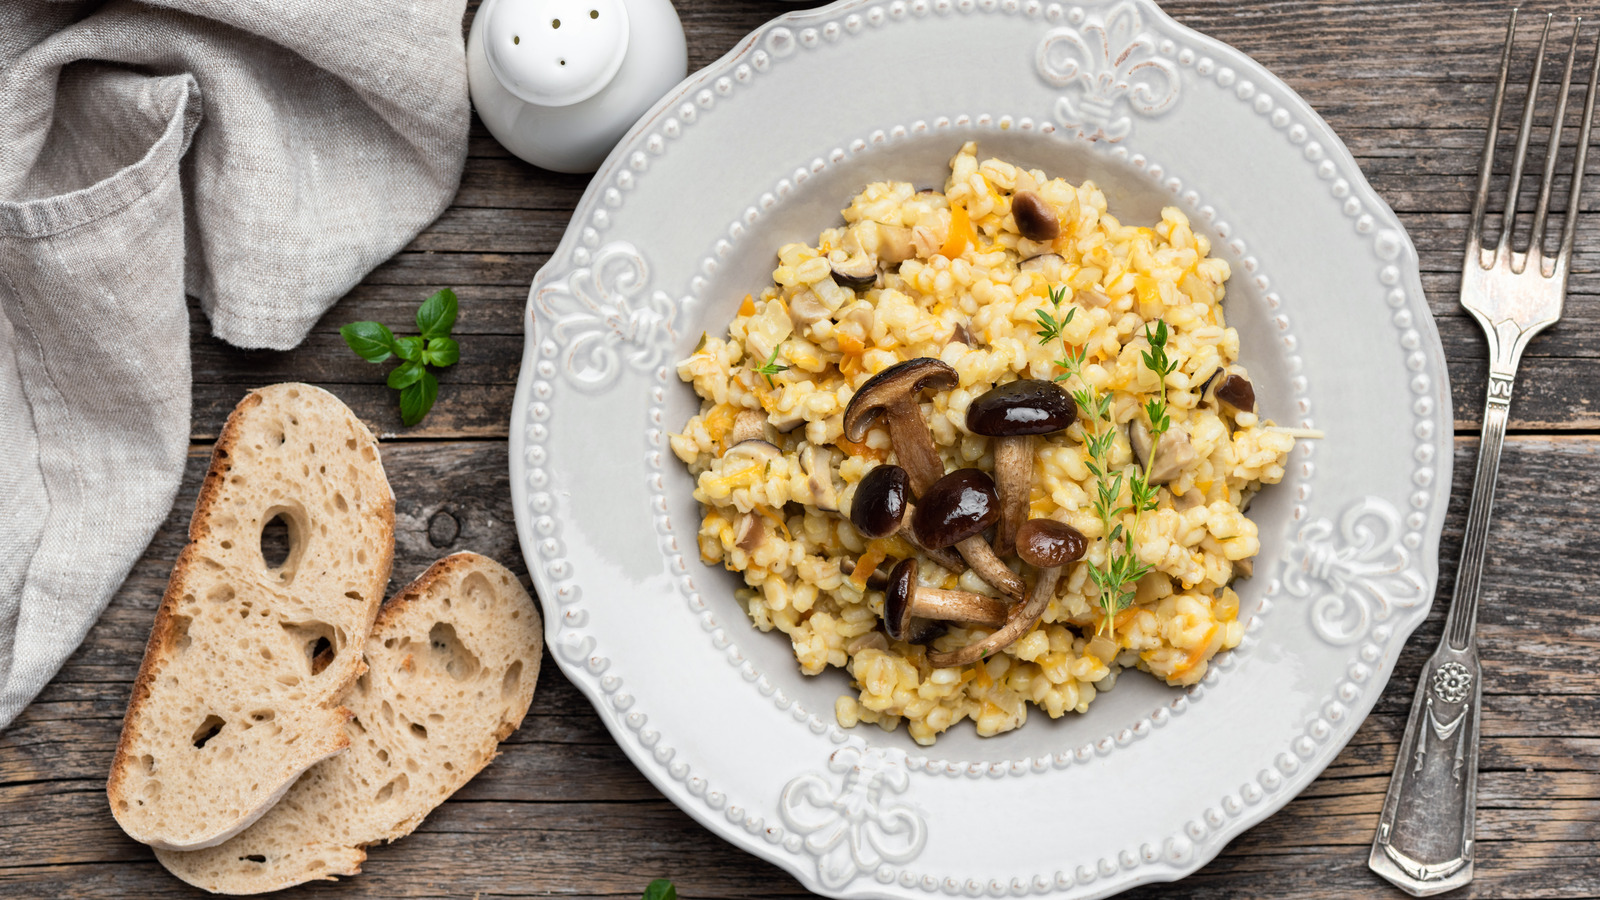 Cook dairy-free pasta dishes like risotto for super creamy results